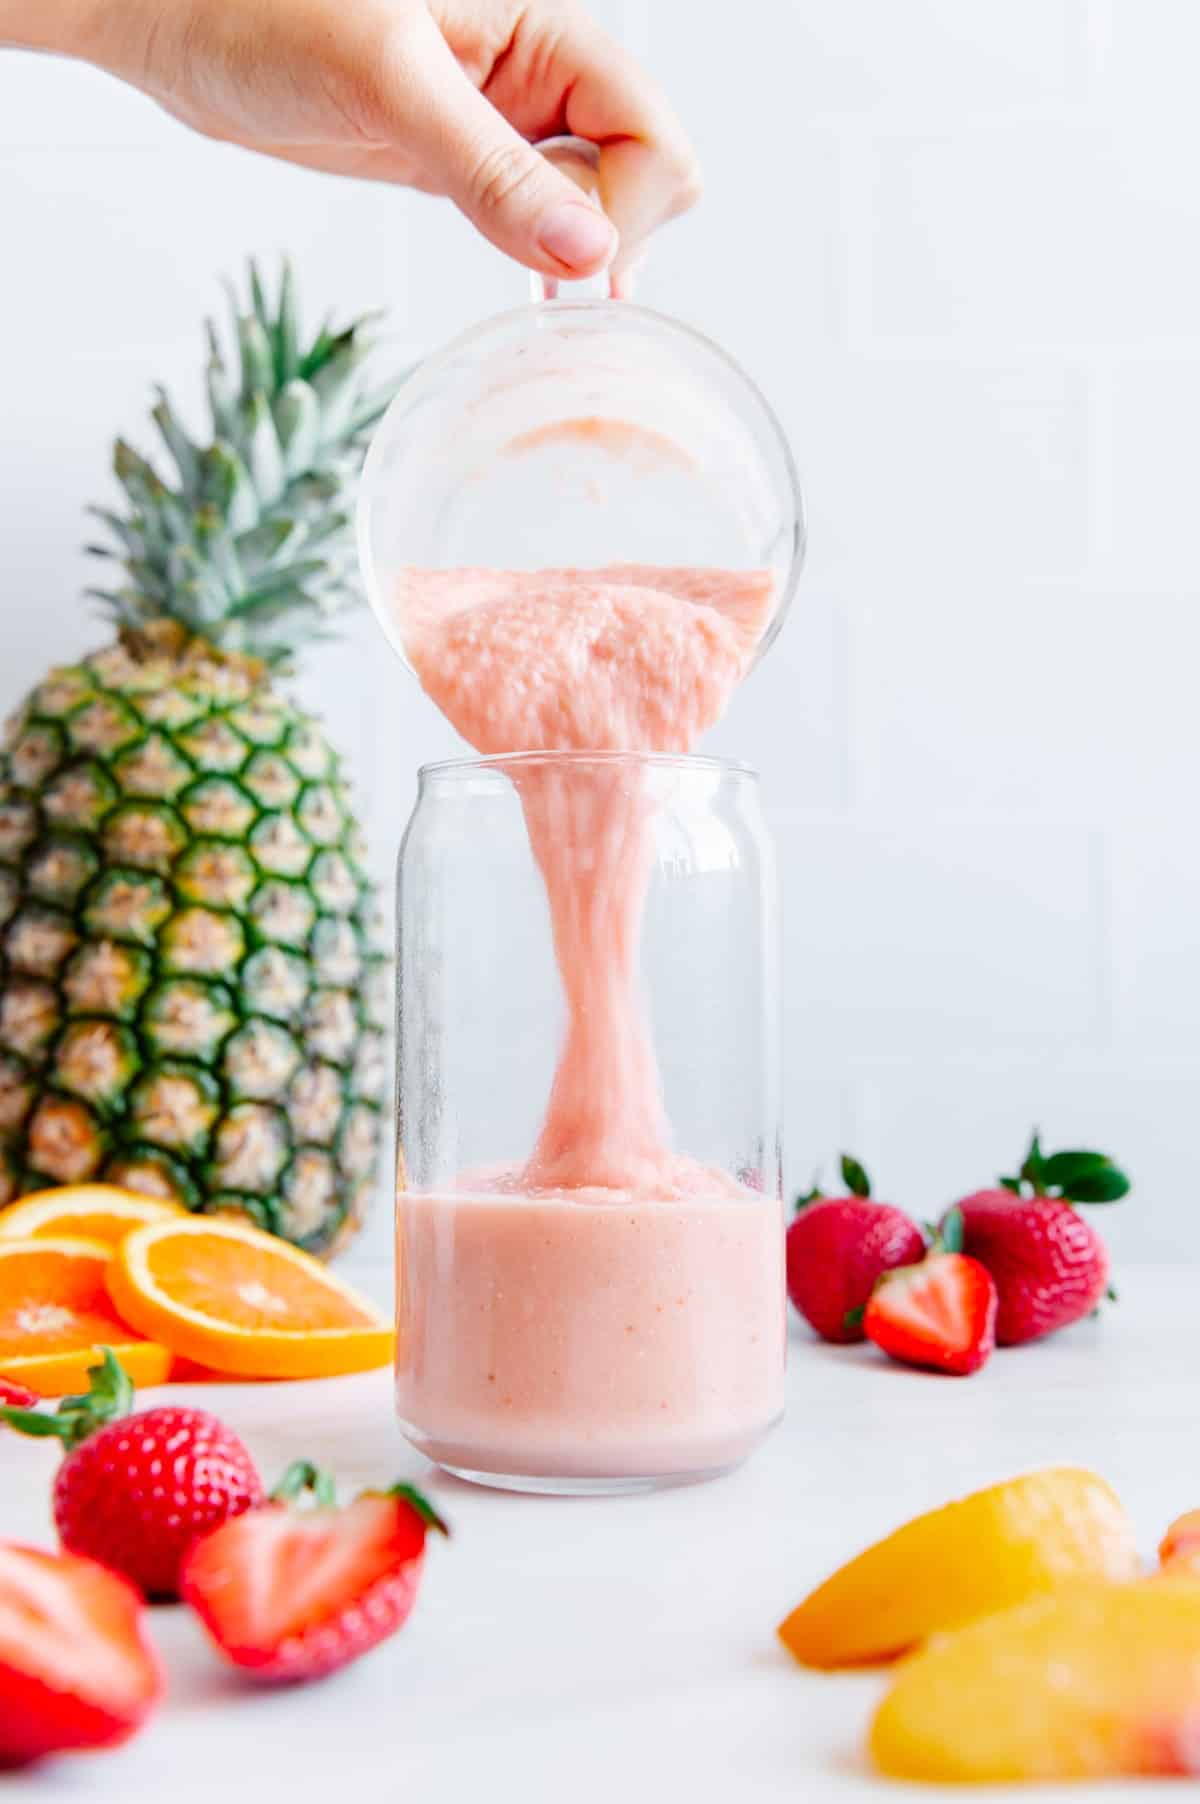 A vegan tropical smoothie being poured into a glass.